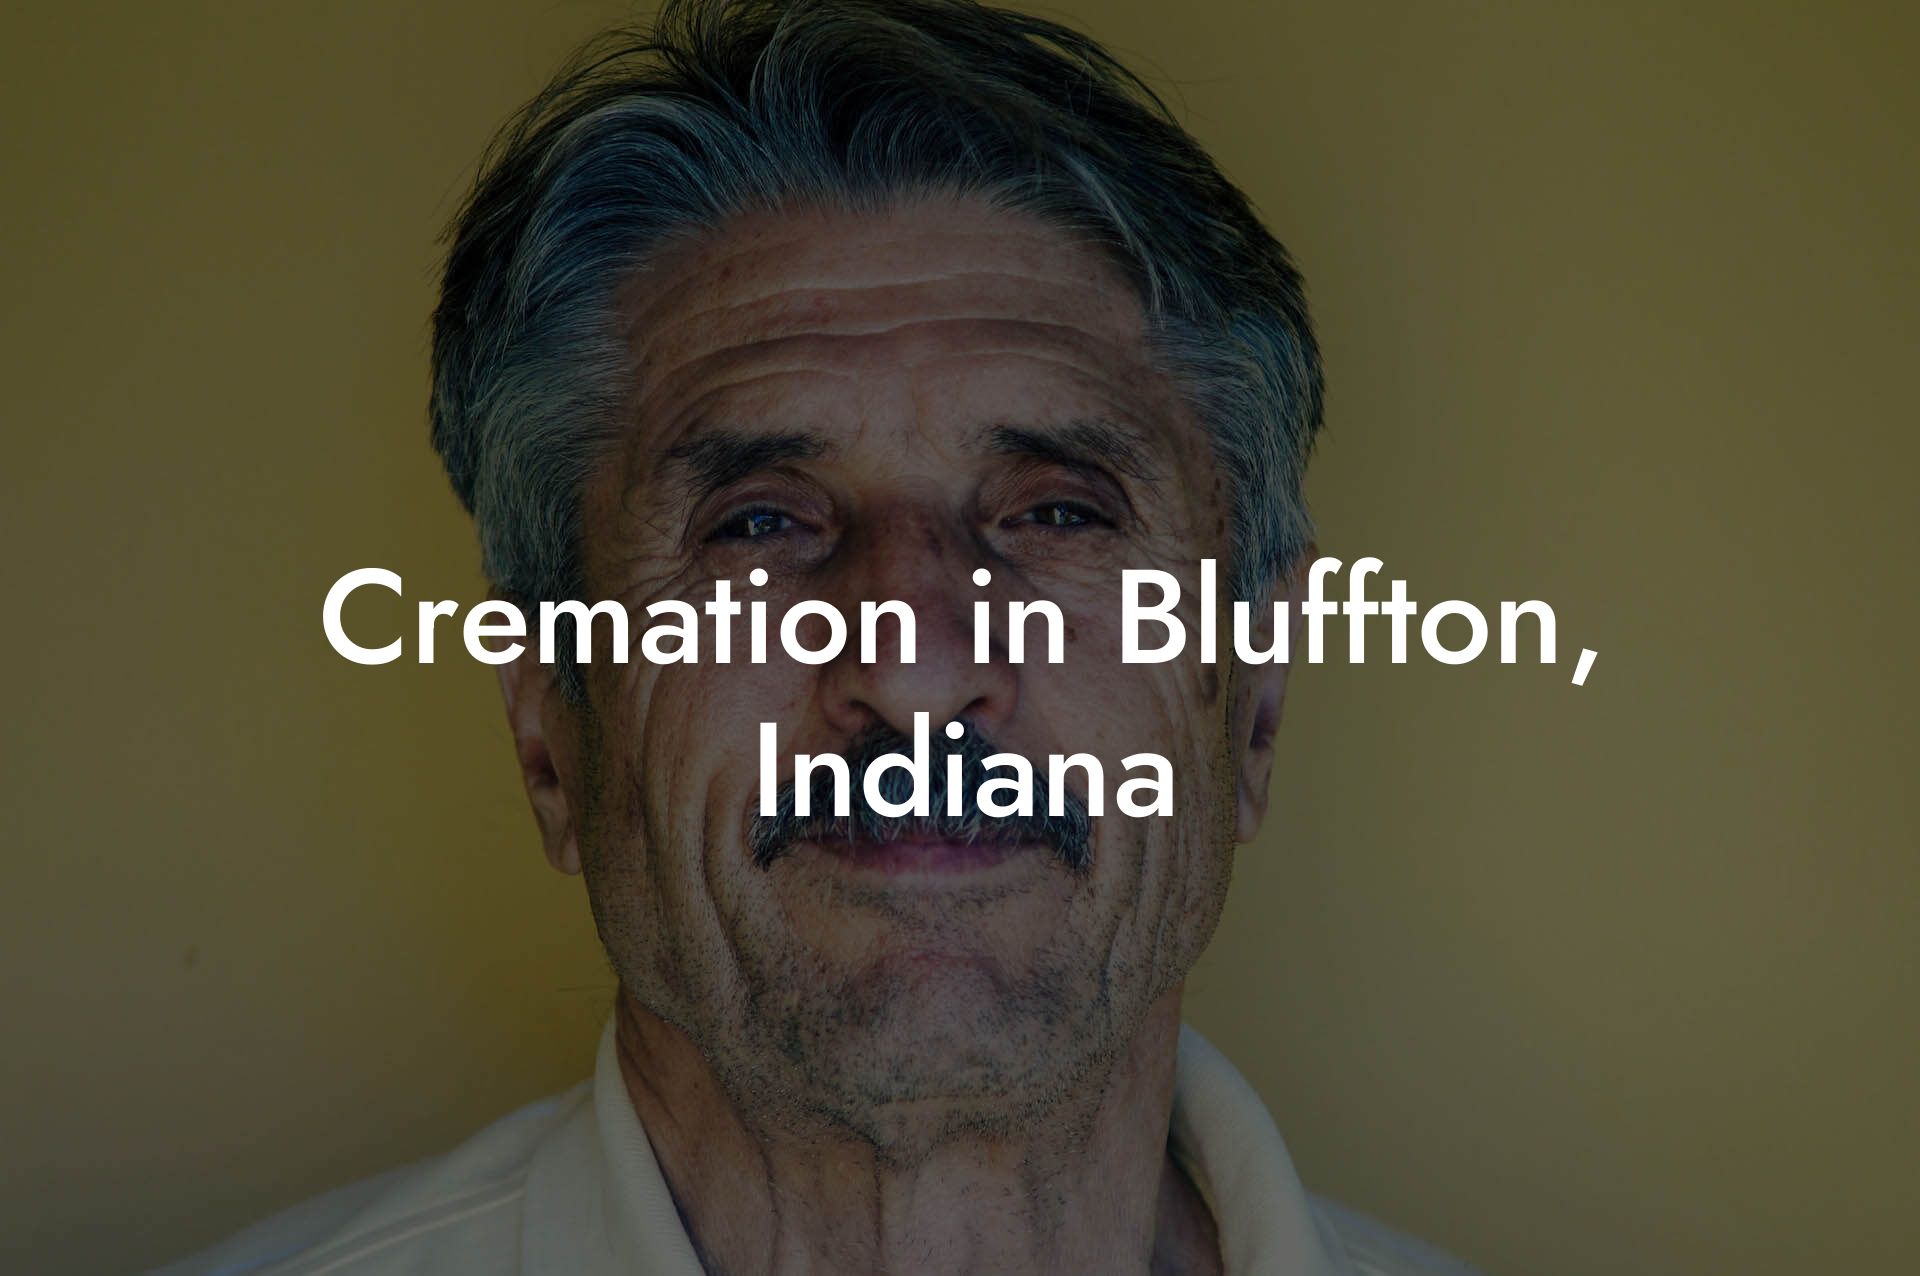 Cremation in Bluffton, Indiana